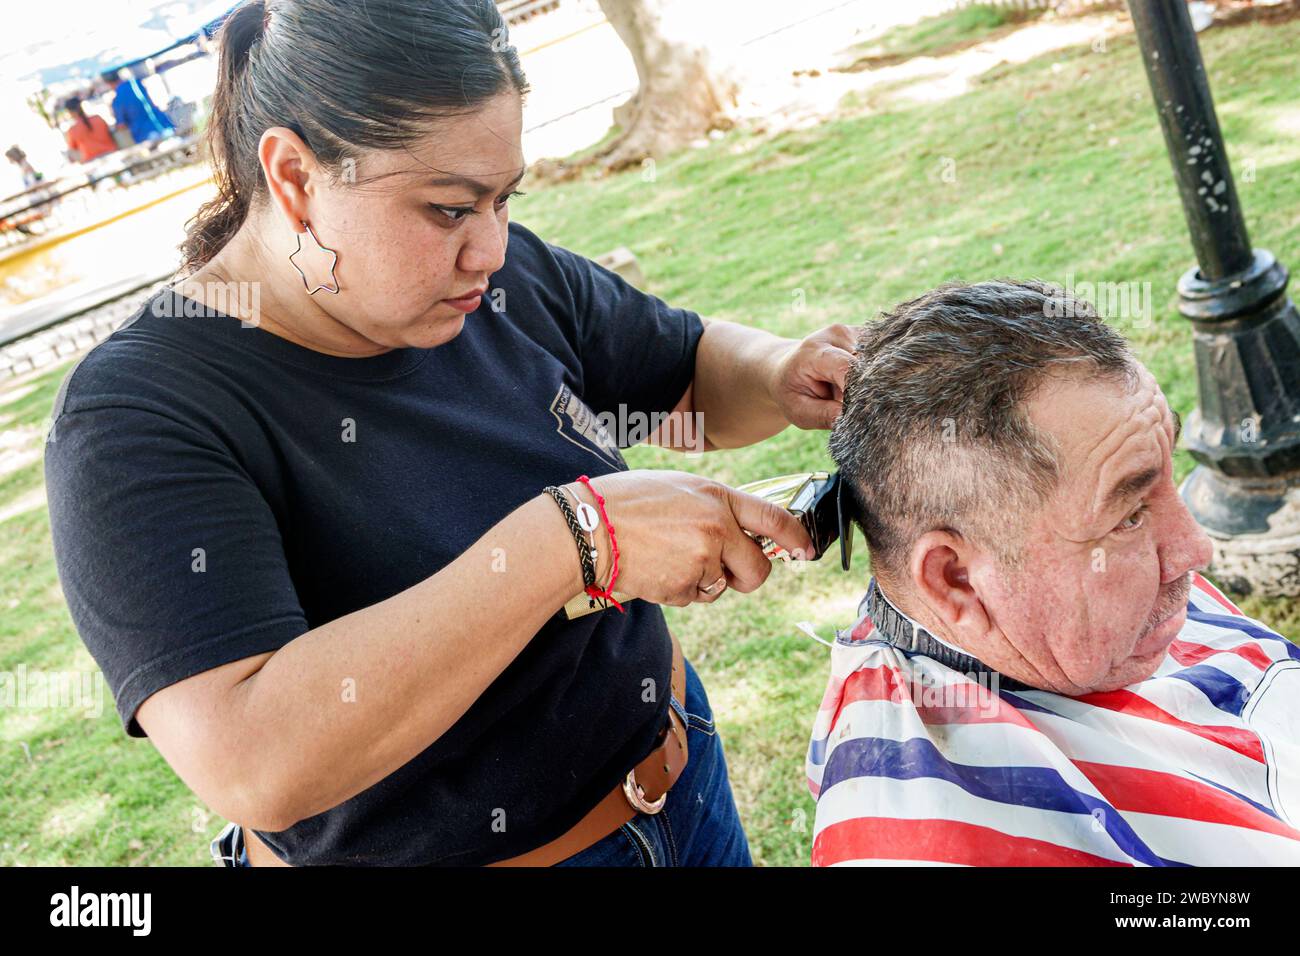 Merida Mexico,centro historico central historic district,Parque de San Juan,salon beauty school hair stylist student offering free haircuts styling,wo Stock Photo